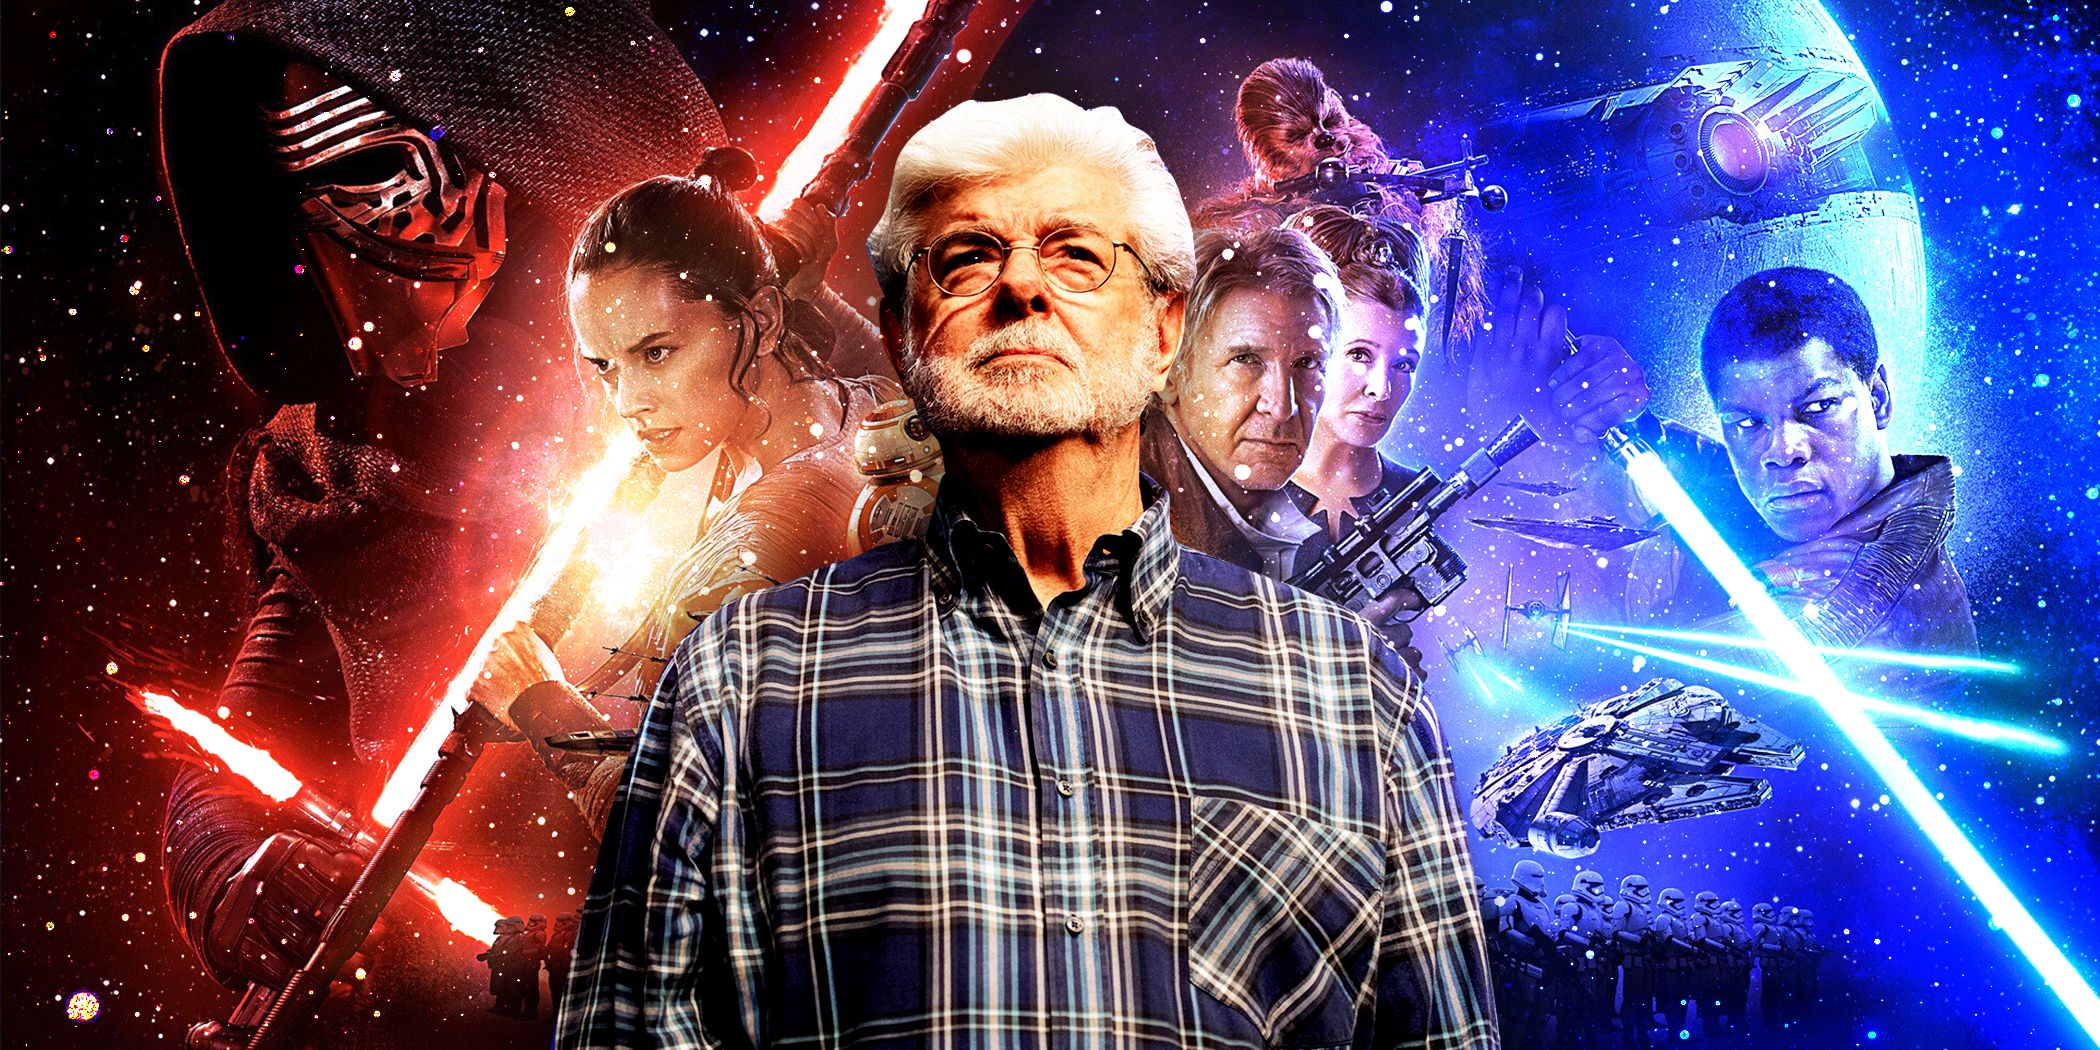 George Lucas in front of images from the sequel trilogy posters